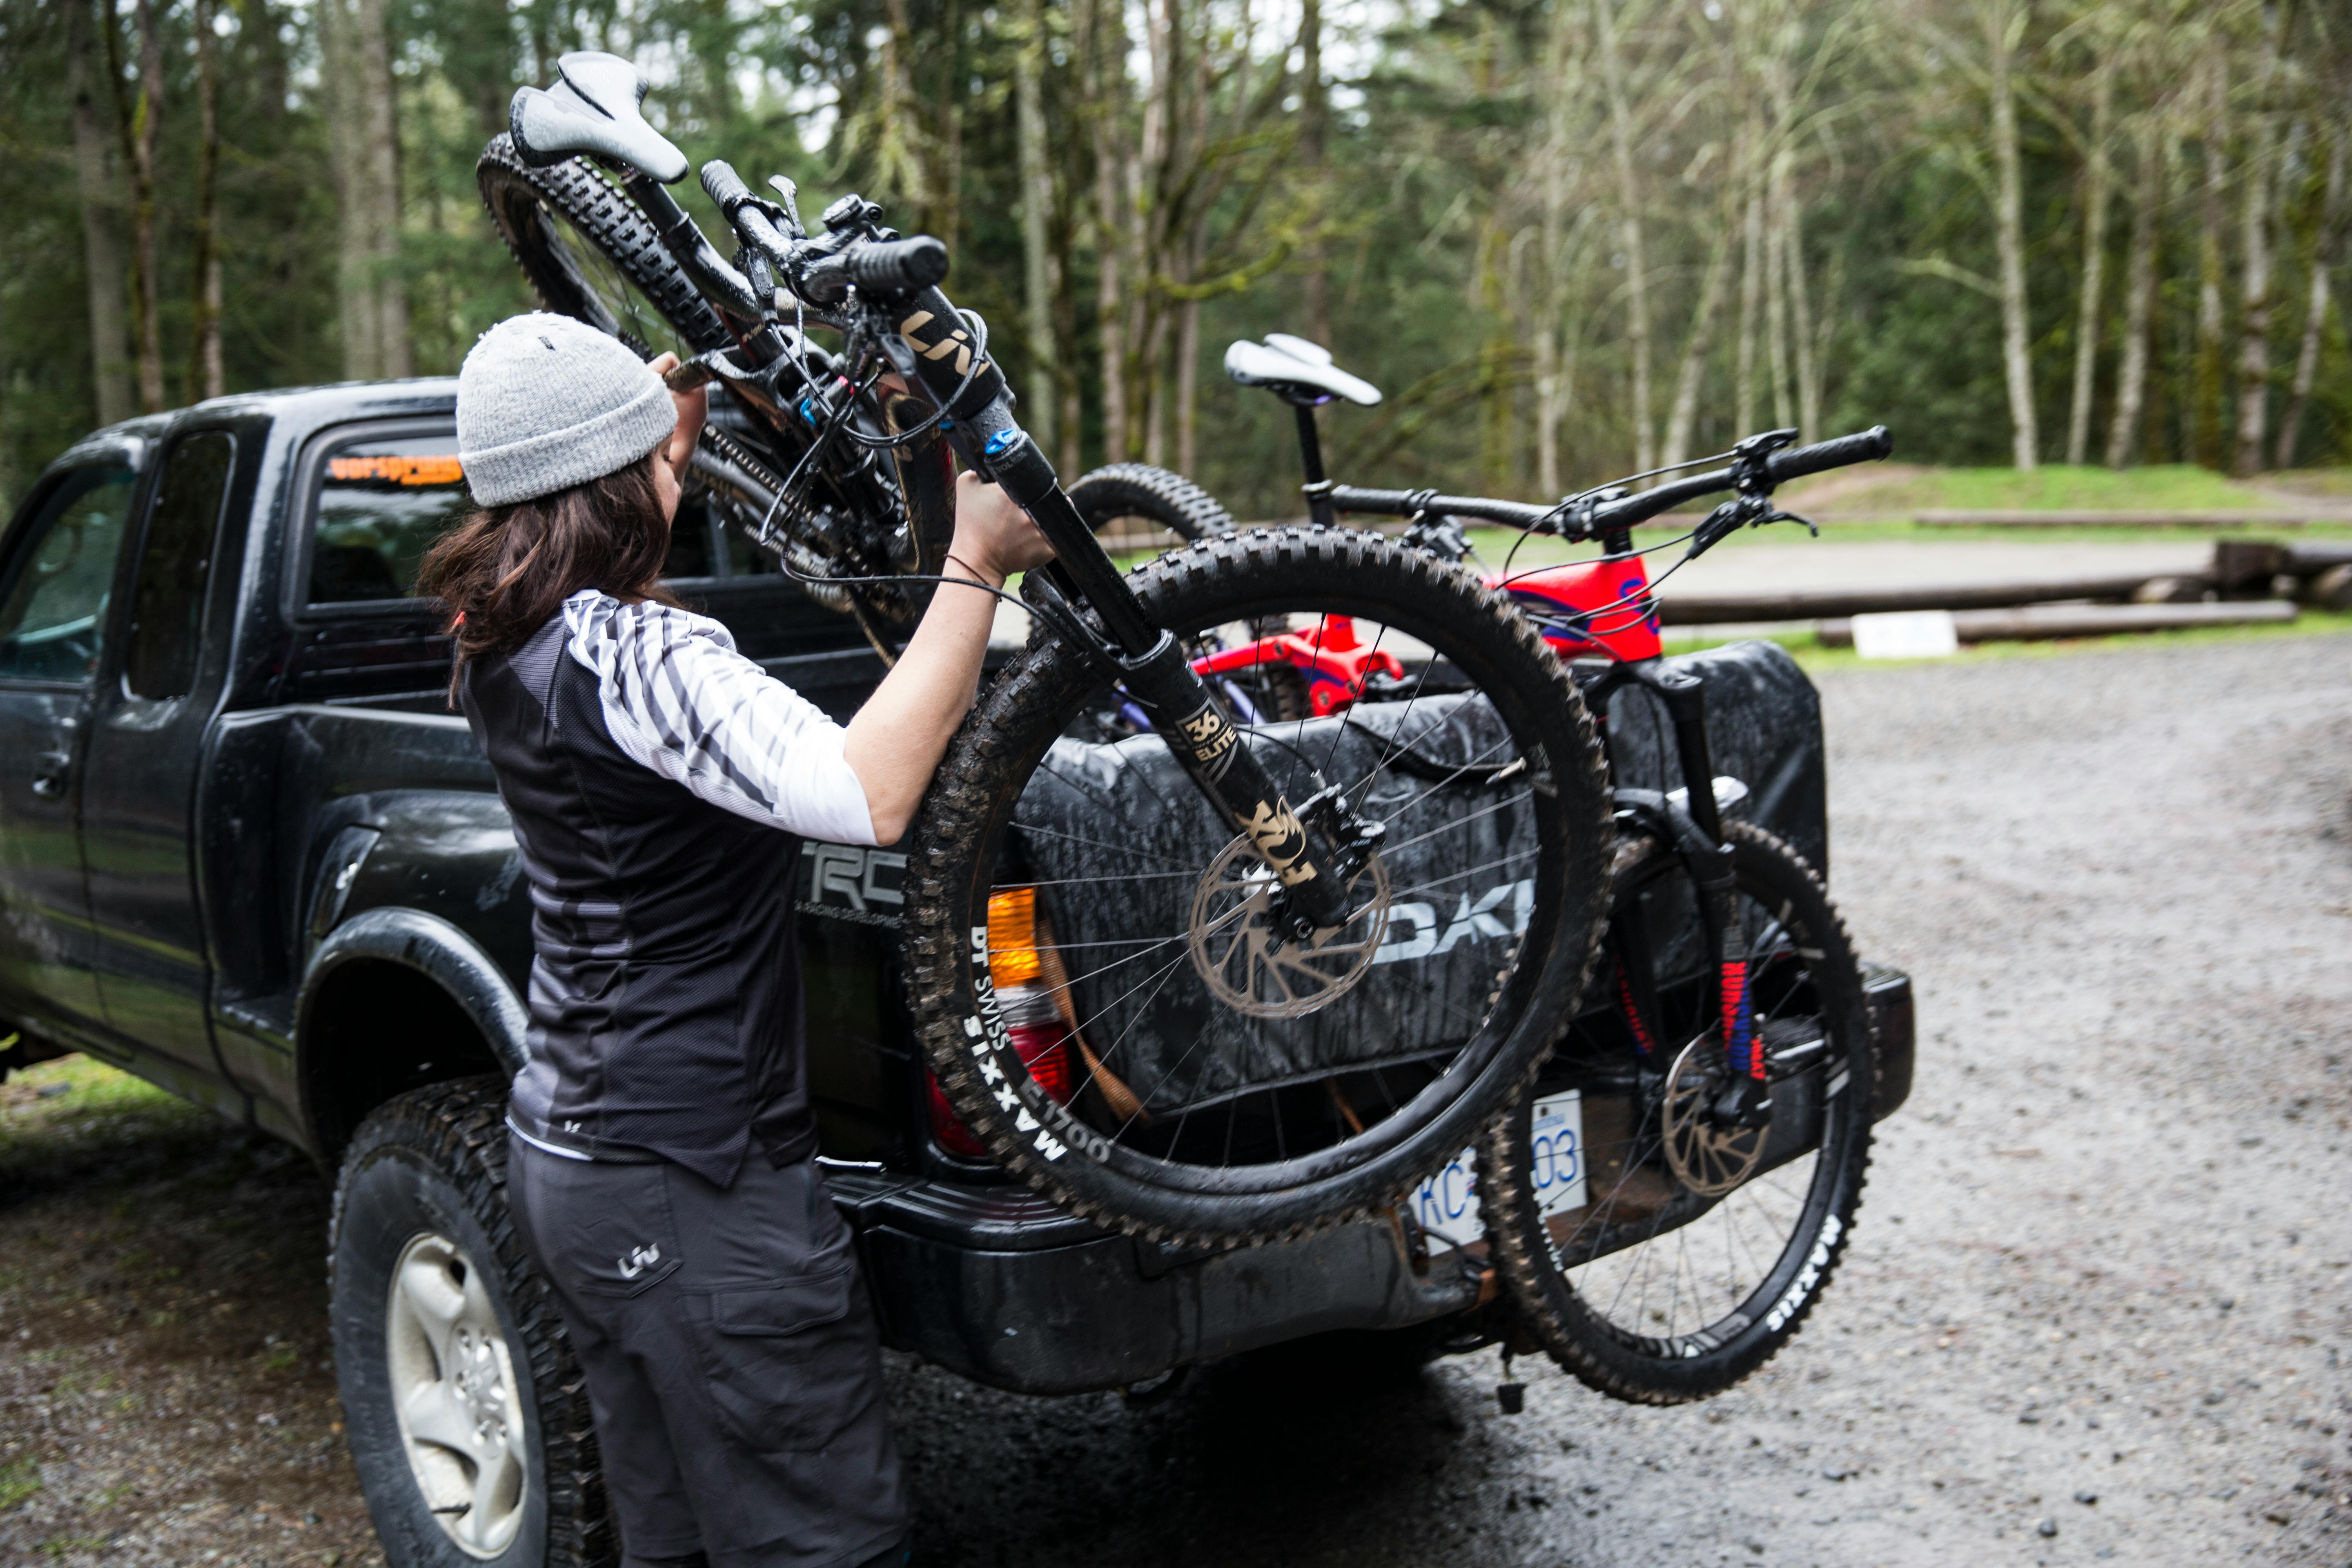 A woman loading mountain bikes into the back of a black pickup truck.